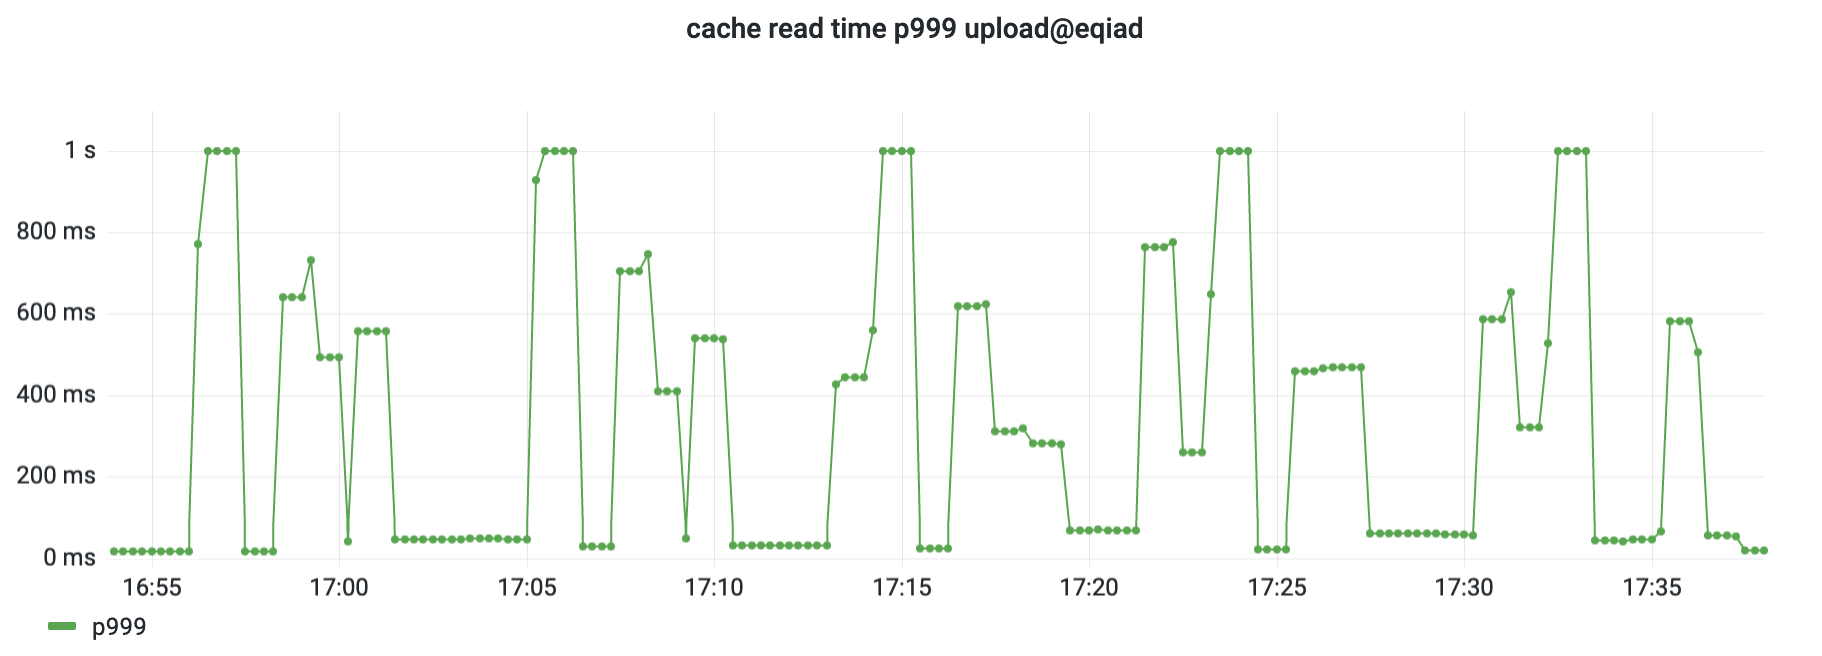 Plot of ATS cache_read_time p999 before the change, regularly spiking from 5 ms up to 1000 ms every few minutes.